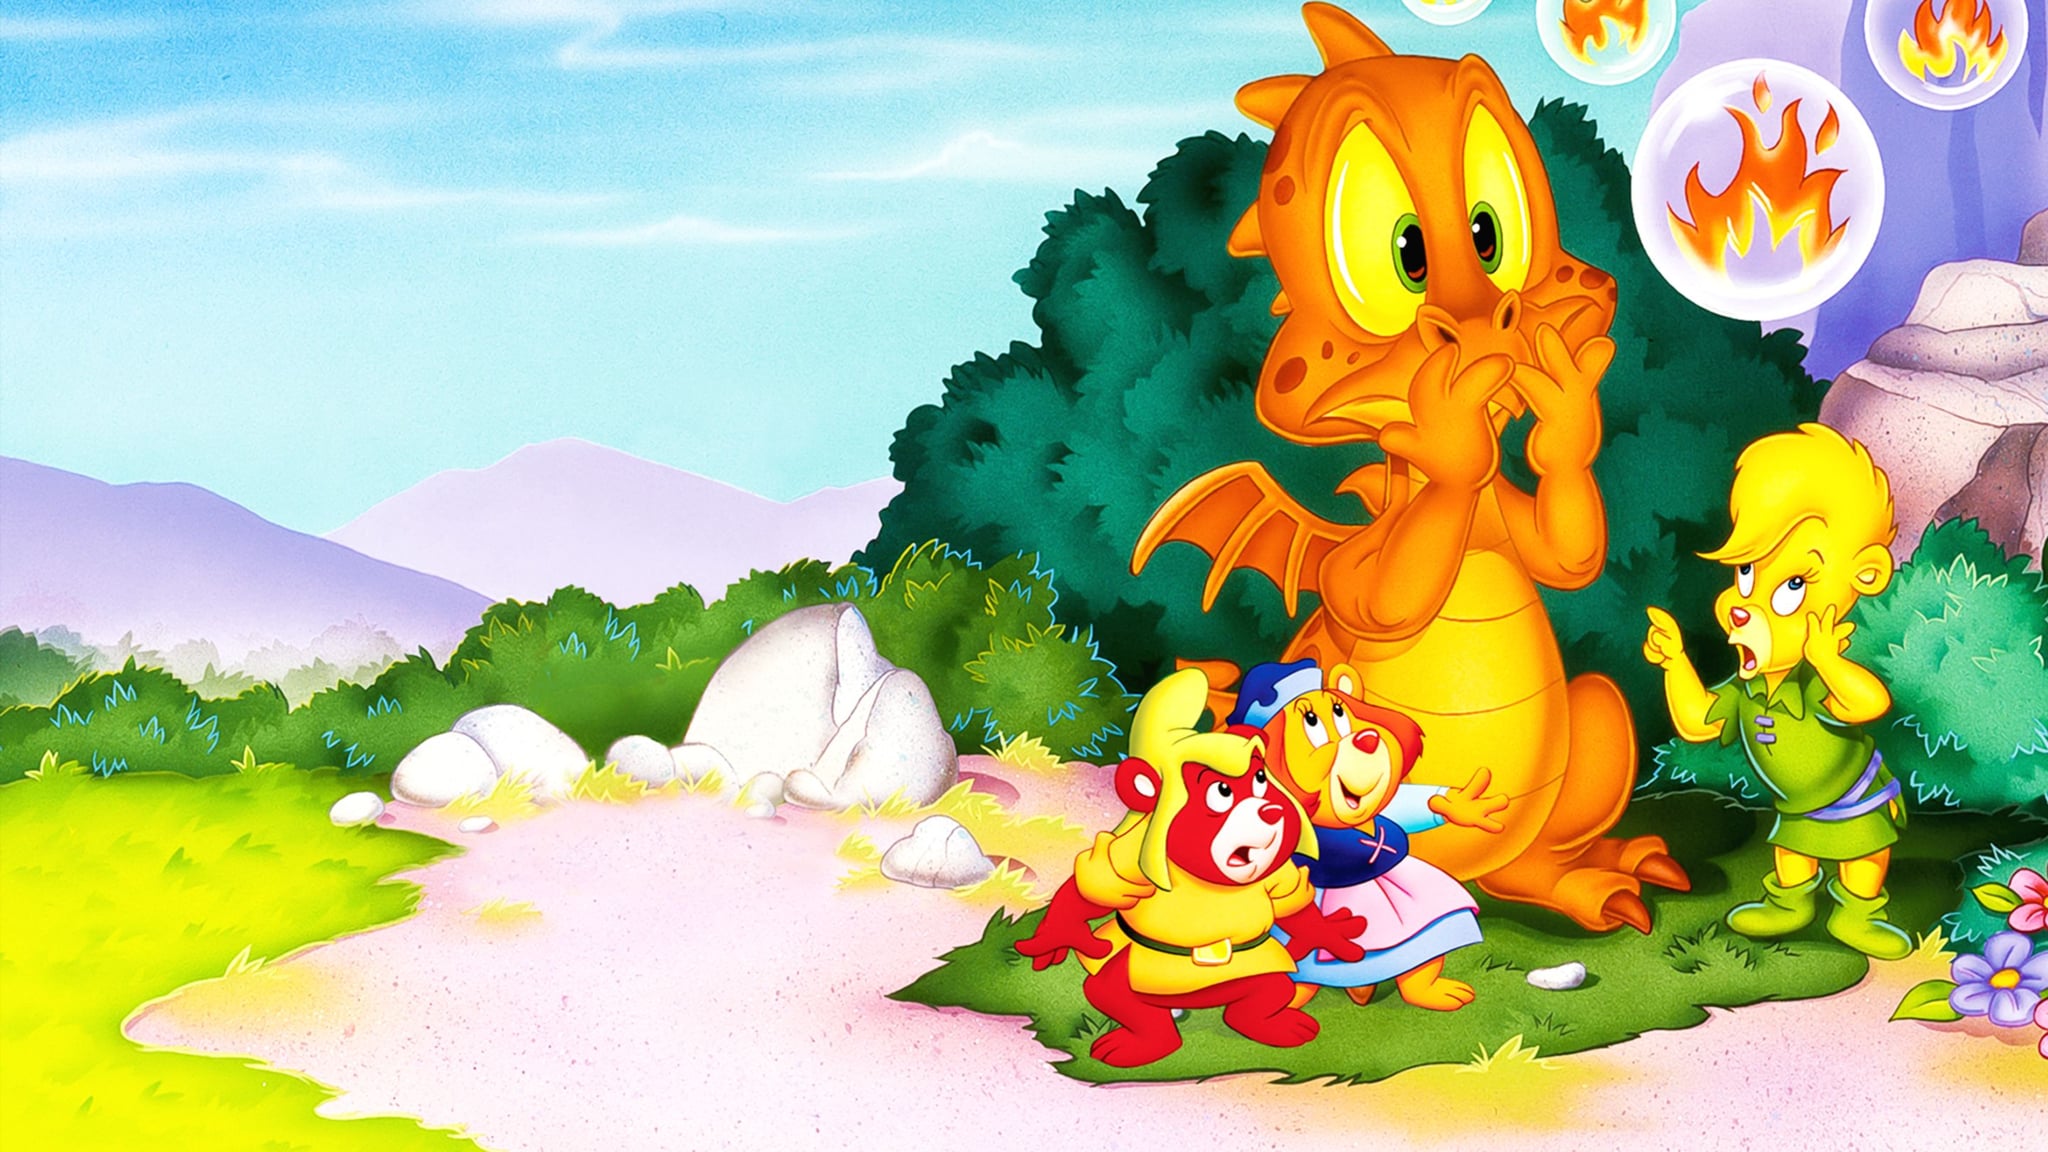 Adventures of the Gummi Bears. From Nostalgic Shows to New Originals: More Than 100 Series For Kids to Stream on Disney+. POPSUGAR Family Photo 75